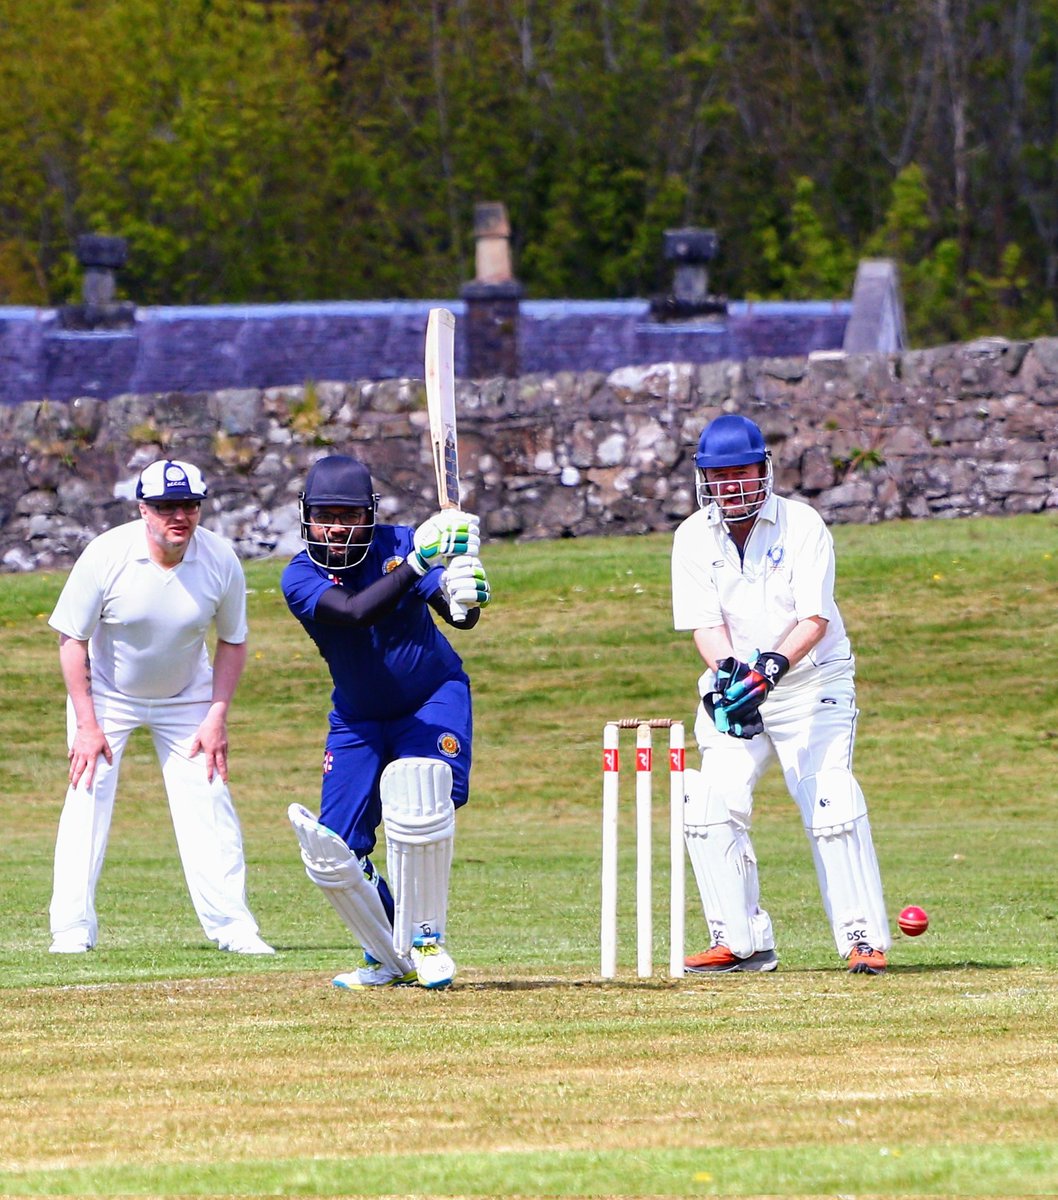 Cracking day for a game of cricket. Bute County and Cowal Cricket Club V @MearnsCricket . More pics in the Bute Sport group on Flickr.